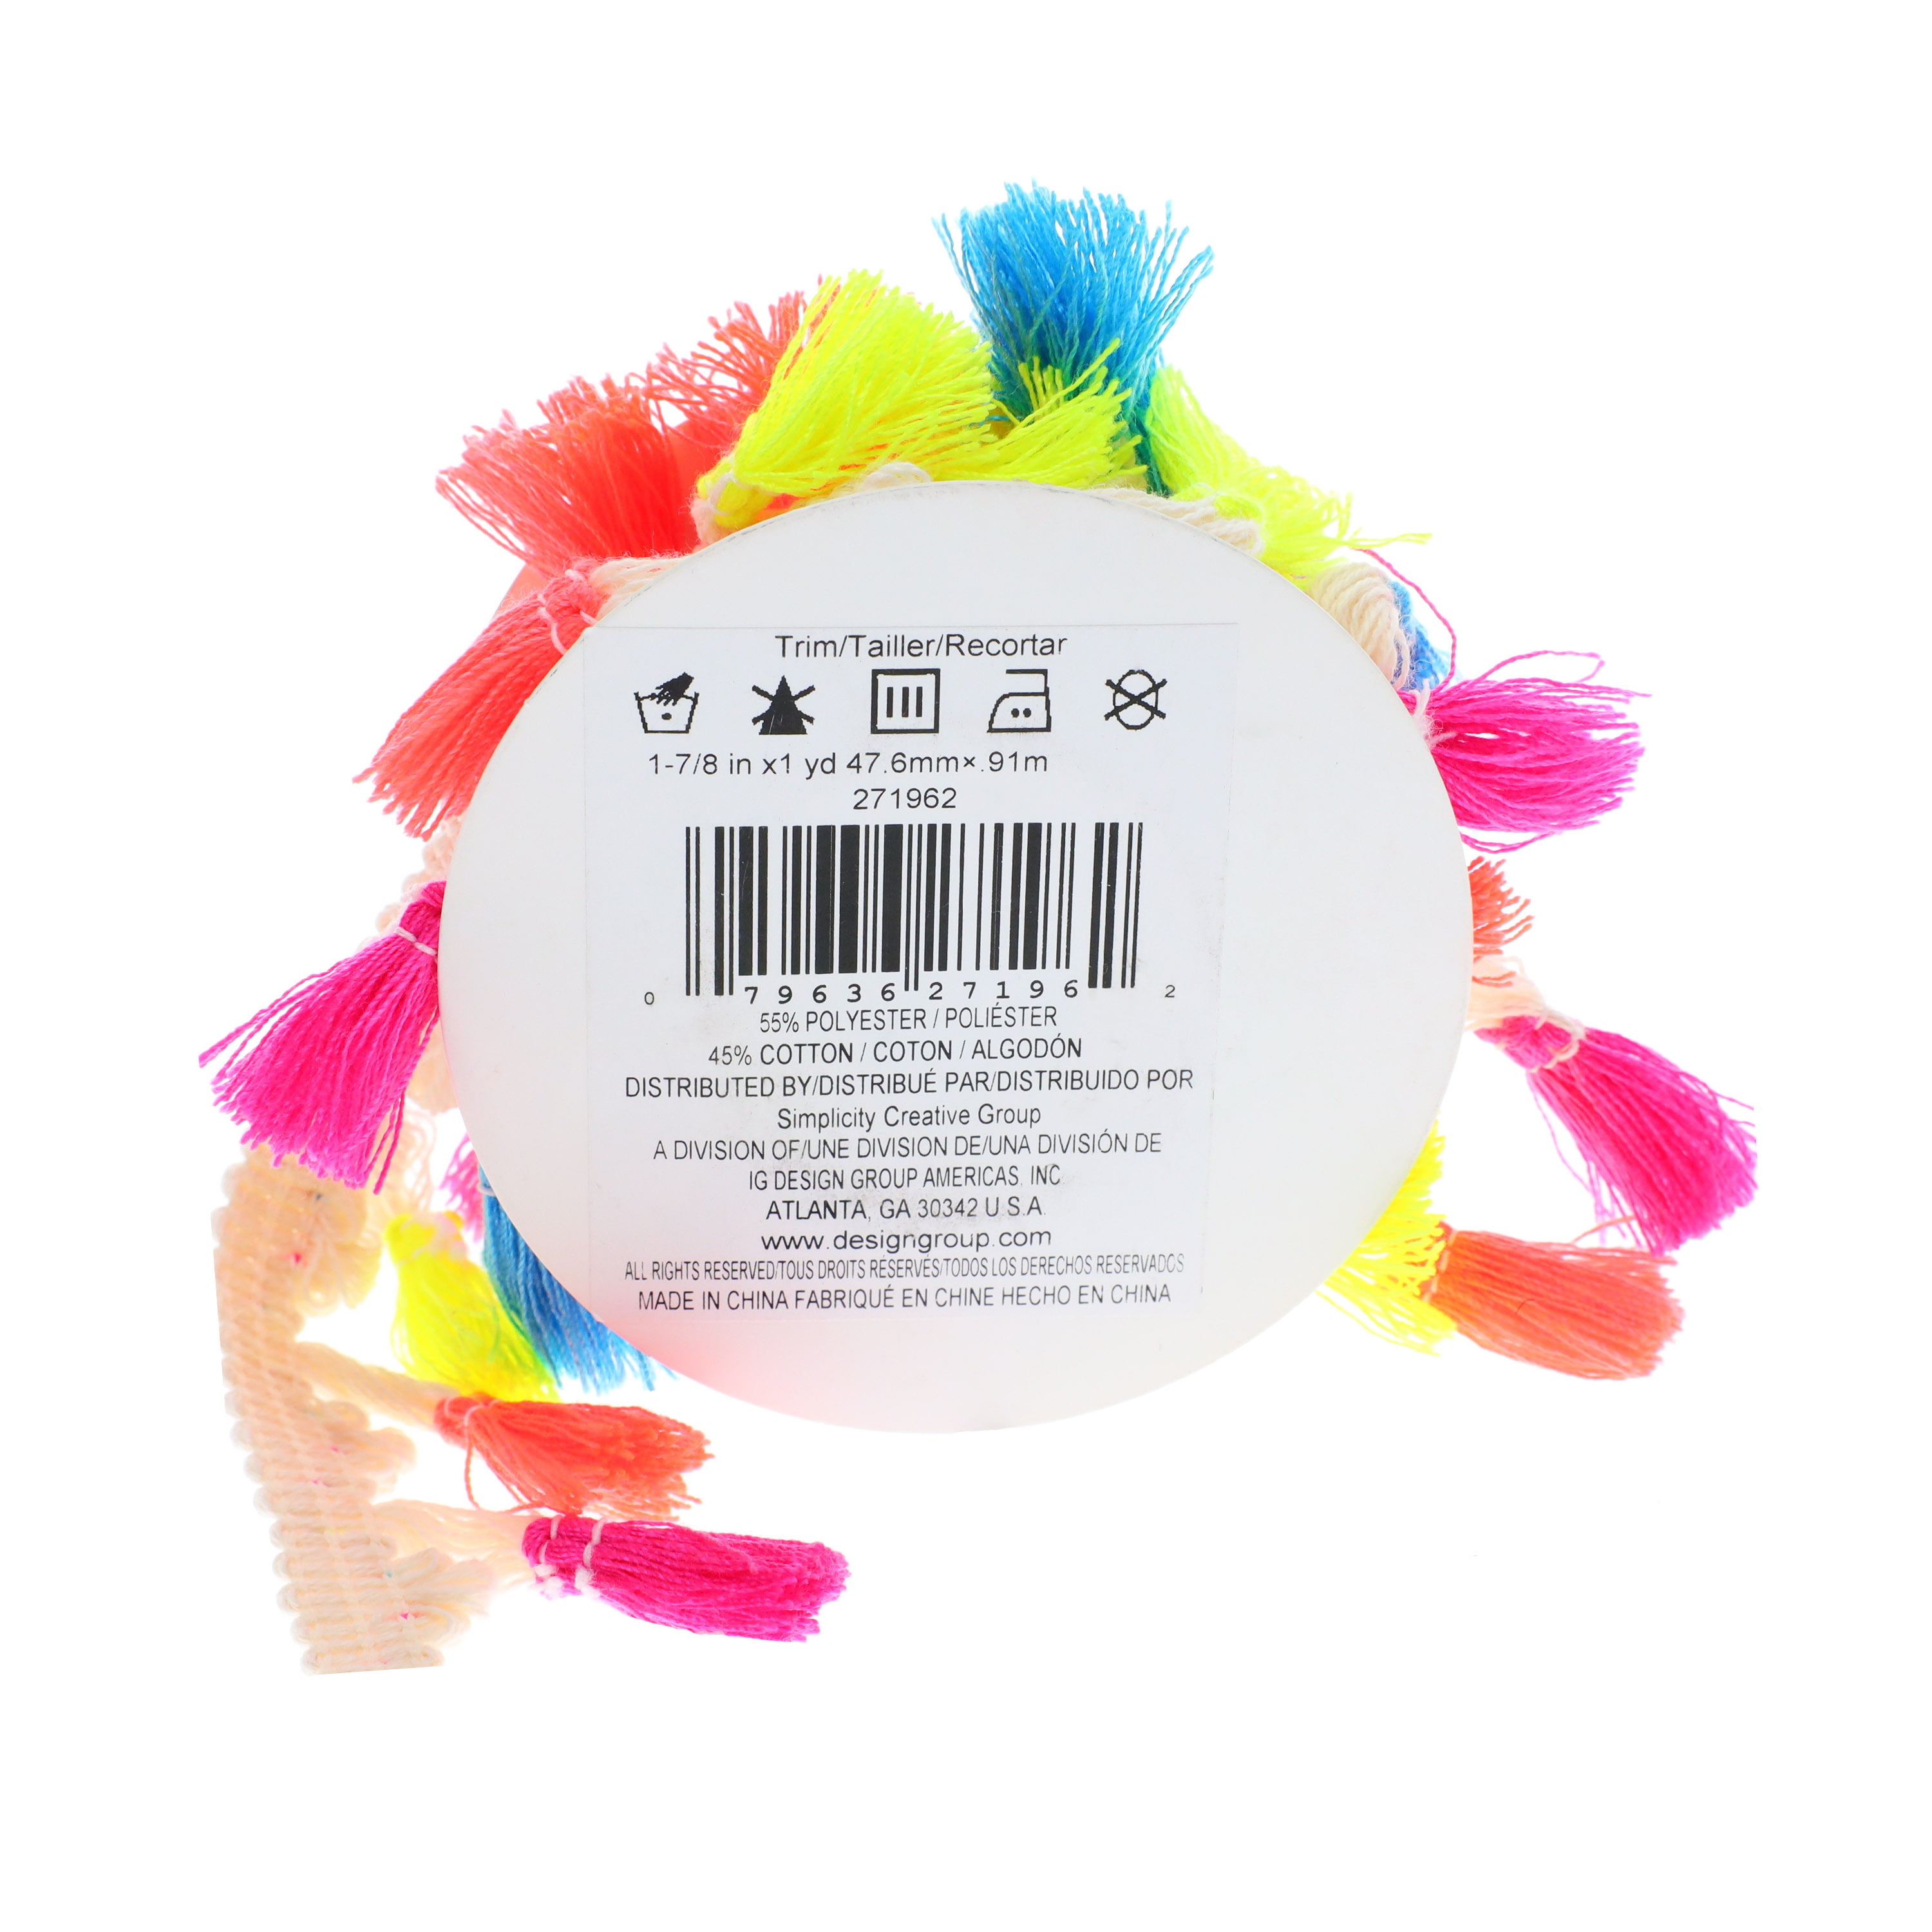 Tianna Beaded Pom Pom Trim - Multi Colors (Sold by the Yard